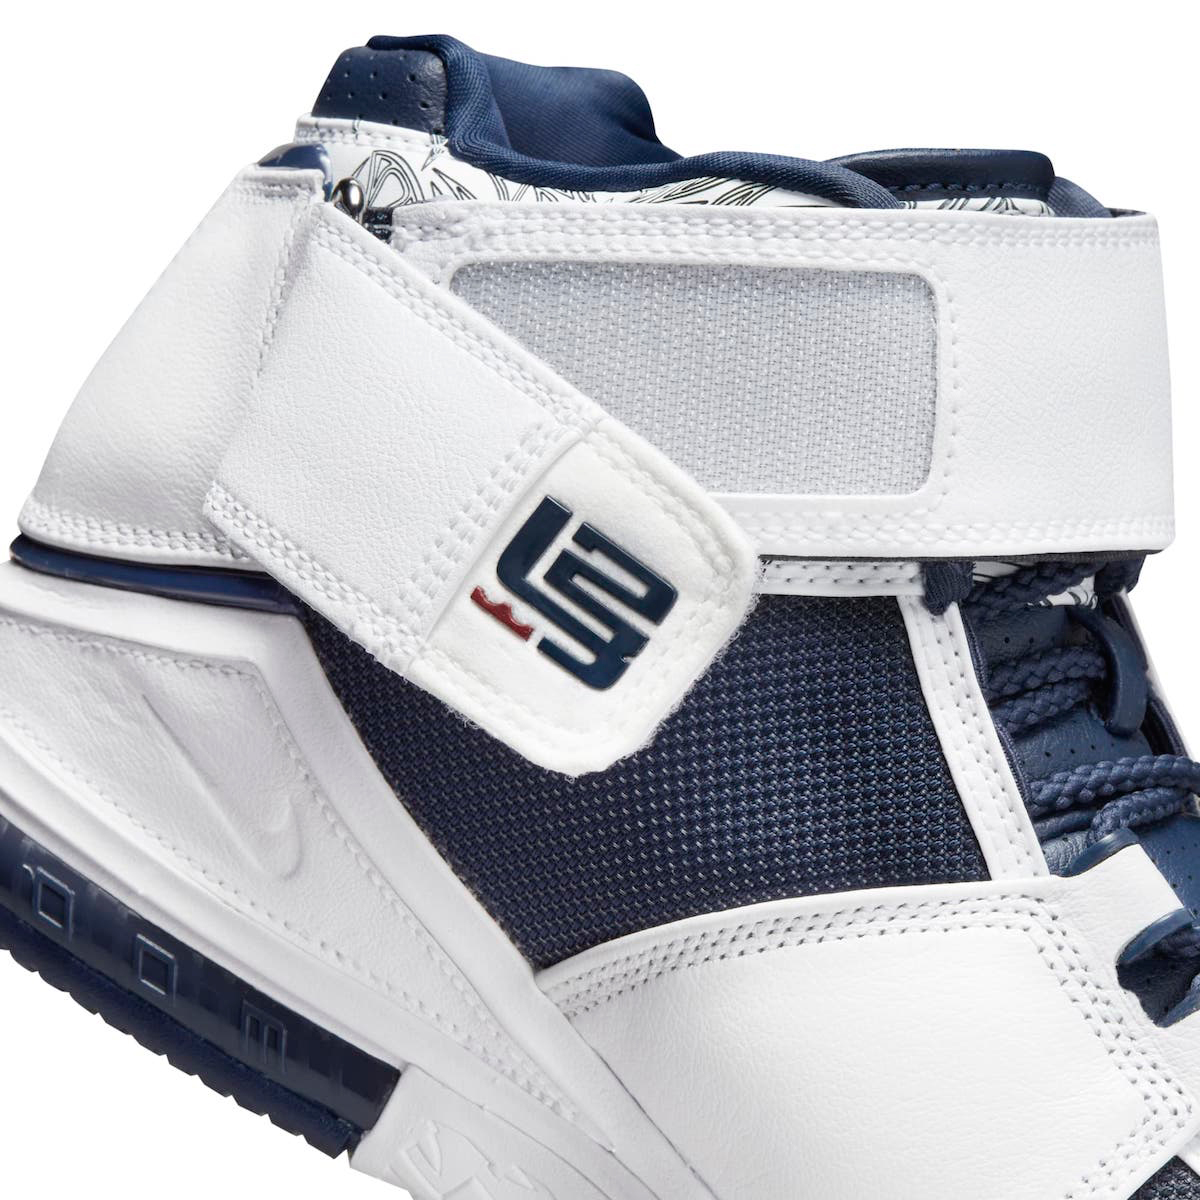 Nike-LeBron-2-USA-Midnight-Navy-Release-Date-10